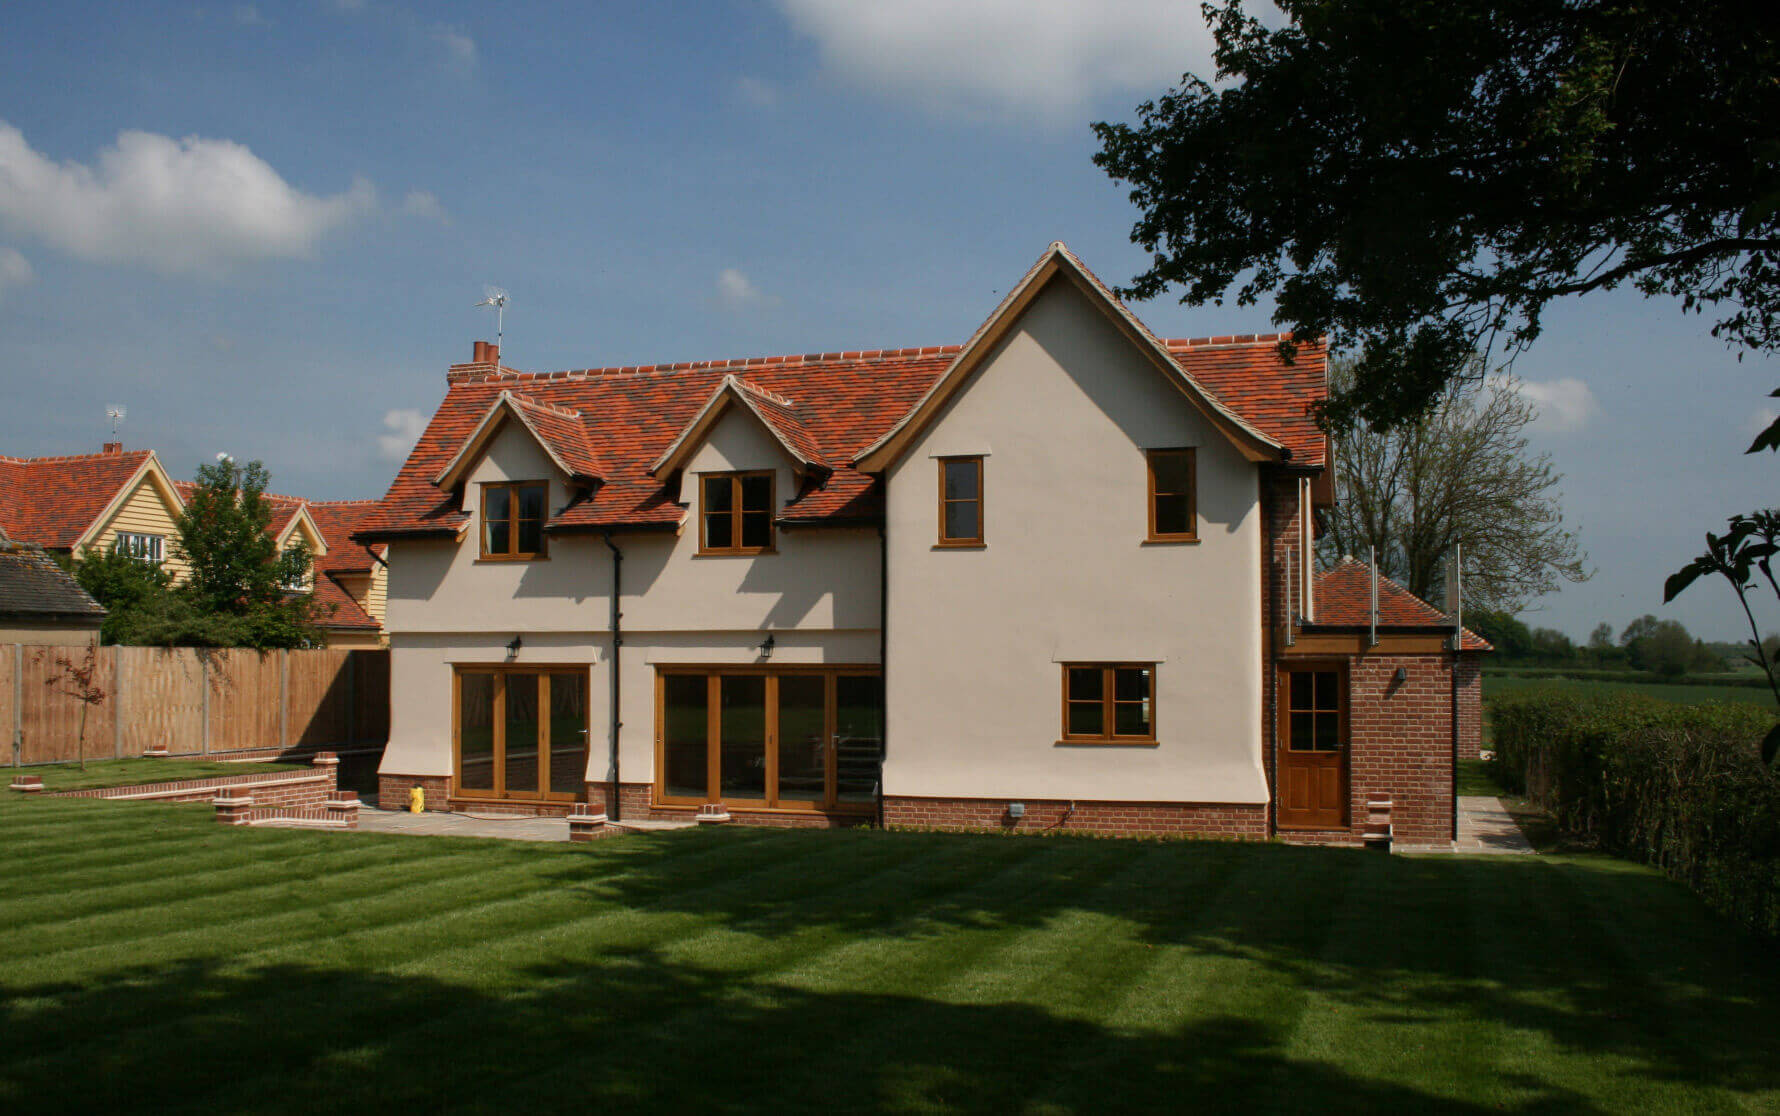 Reverse view of the detached house named Burroughs. Part of the Arkesden Road development